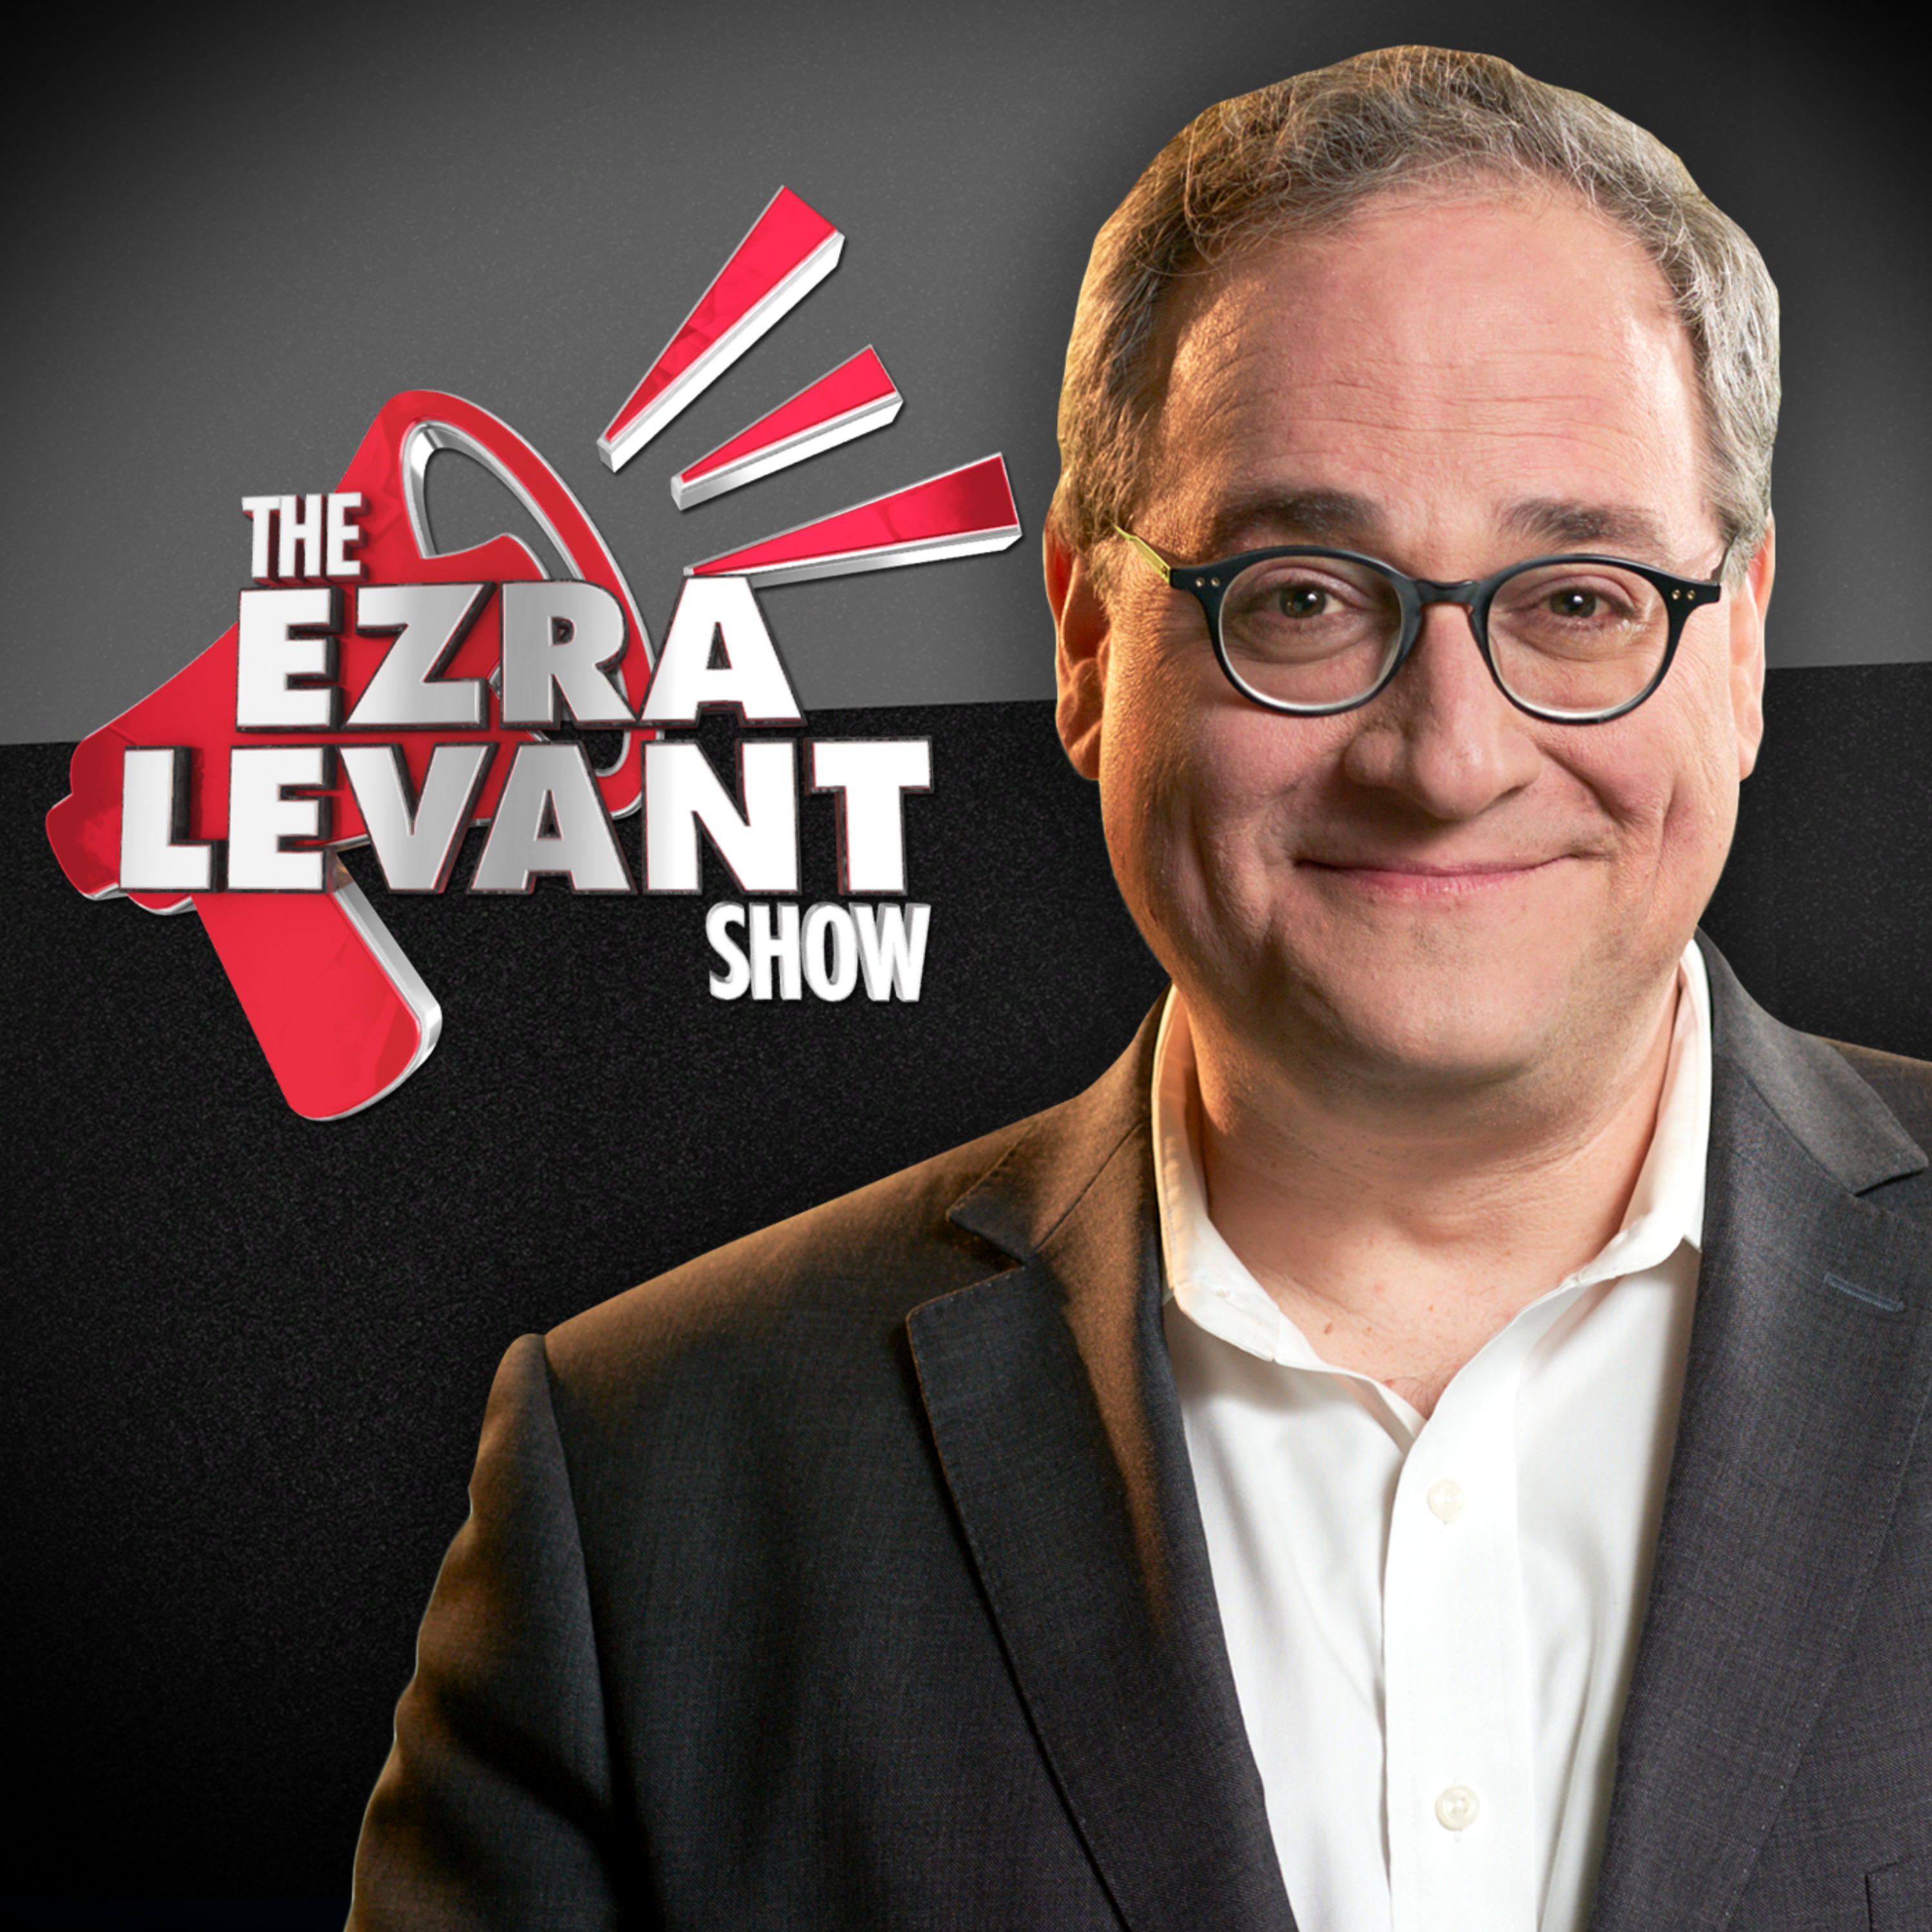 EZRA LEVANT | Is ArriveCAN here to stay? Canada Border Services signs off on cryptic new press release